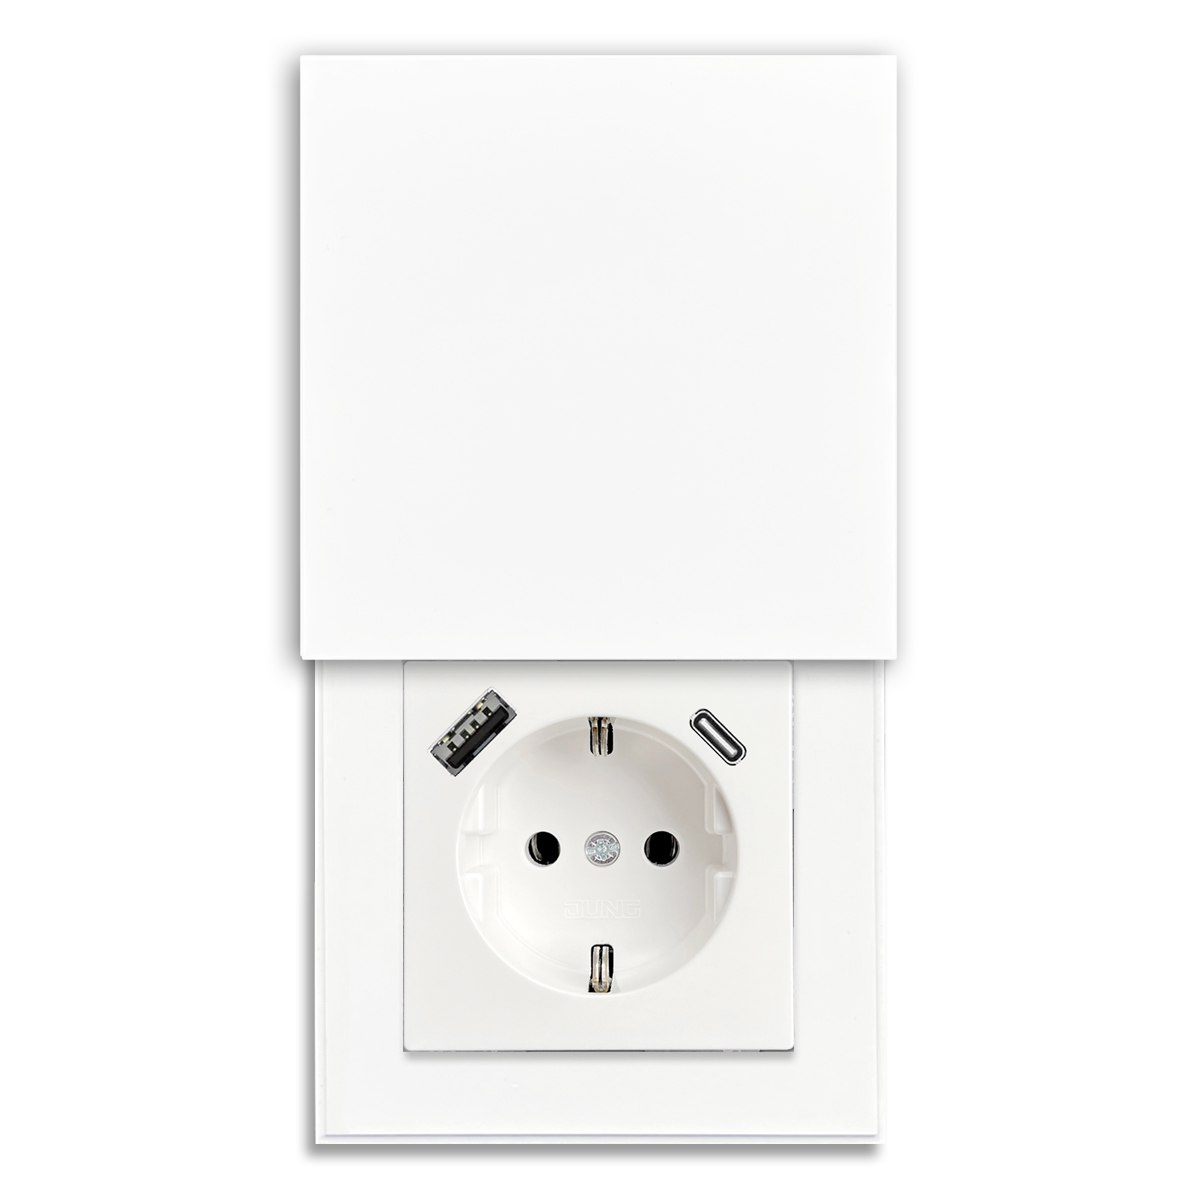 Design Socket outlet with USB A+C and cover 1-fold, alpine white. Kitchen socket outlet.